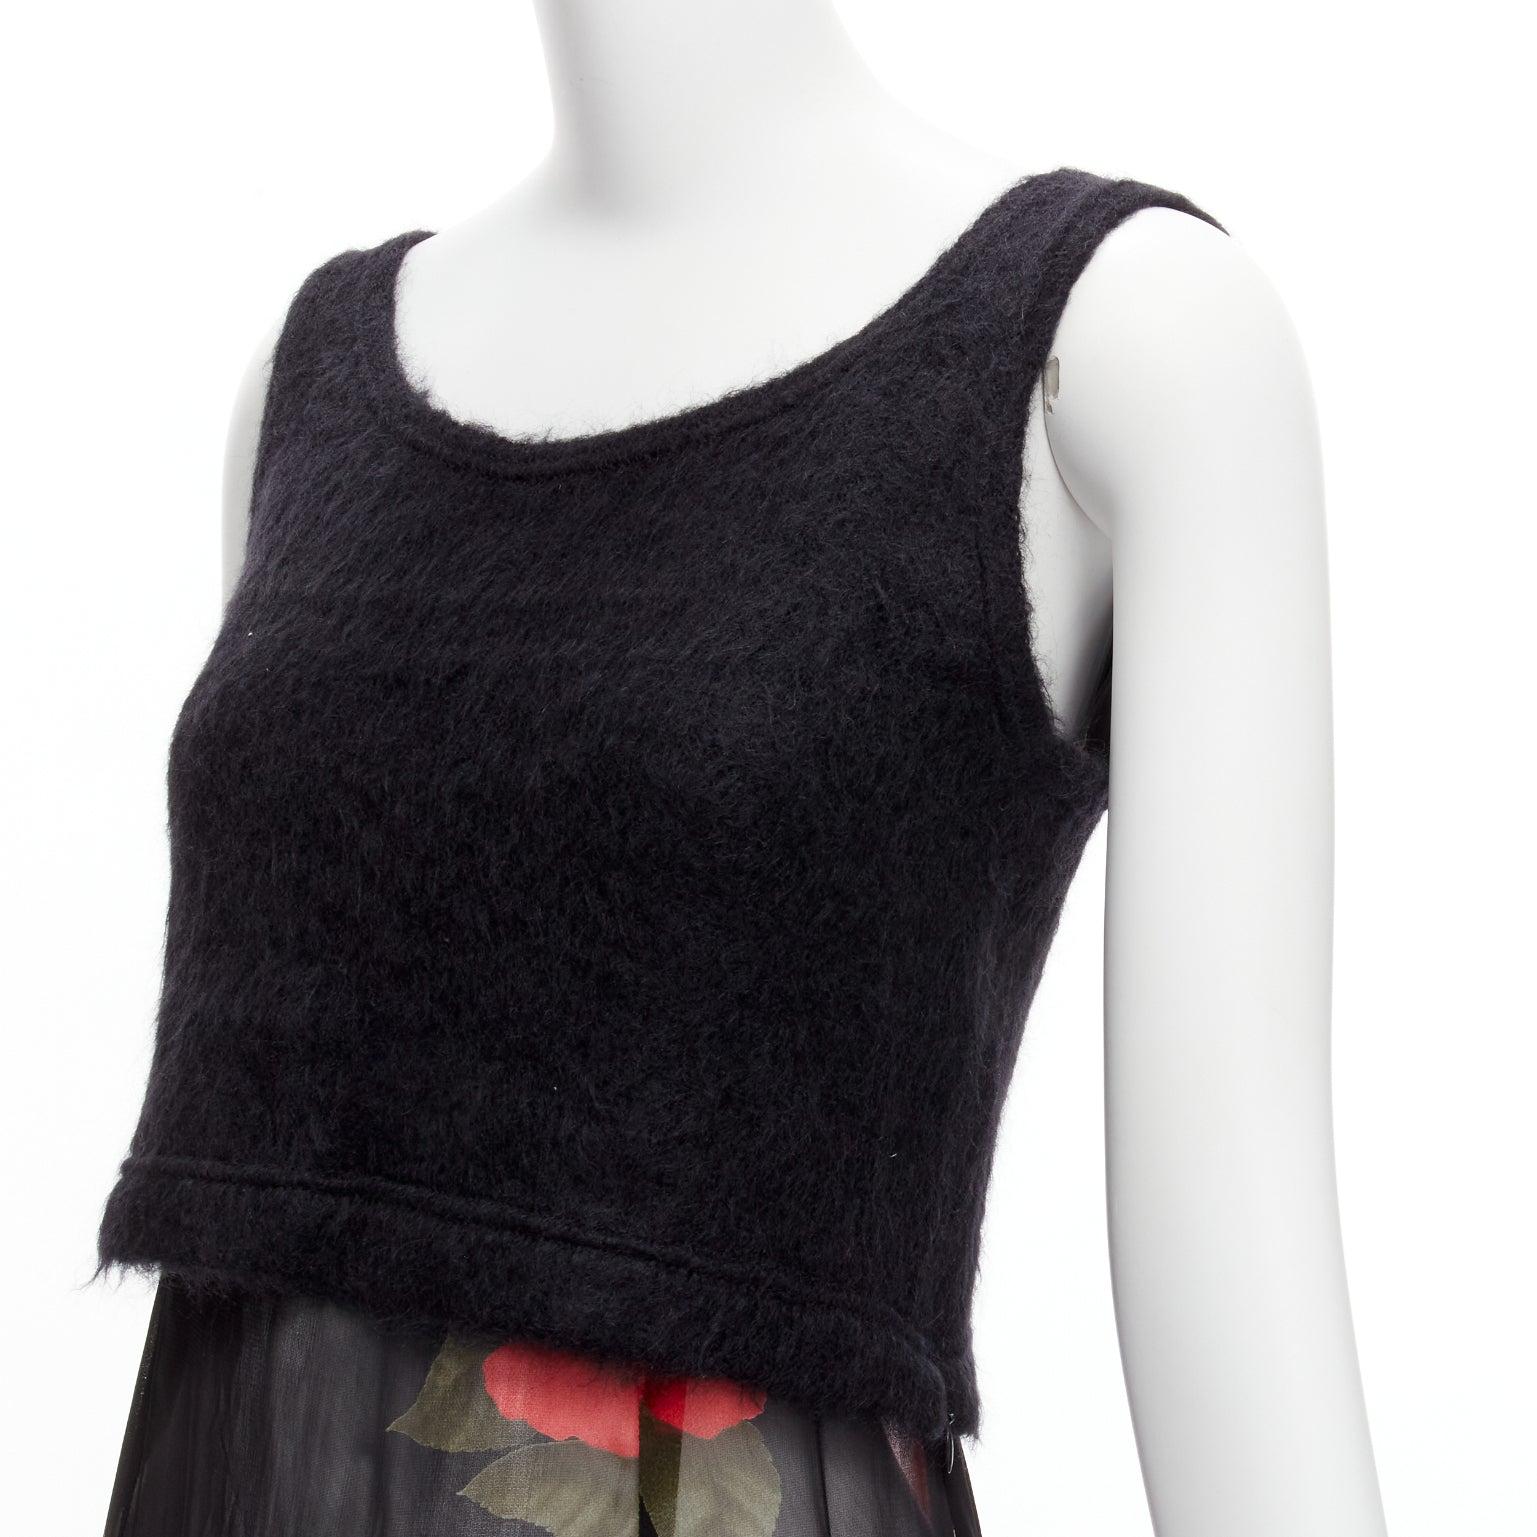 DOLCE GABBANA Vintage sheer red rose dress black cropped sweater vest set IT42 M
Reference: PYCN/A00103
Brand: Dolce Gabbana
Designer: Domenico Dolce and Stefano Gabbana
Collection: Circa 1990's
Material: Viscose
Color: Black, Red
Pattern: